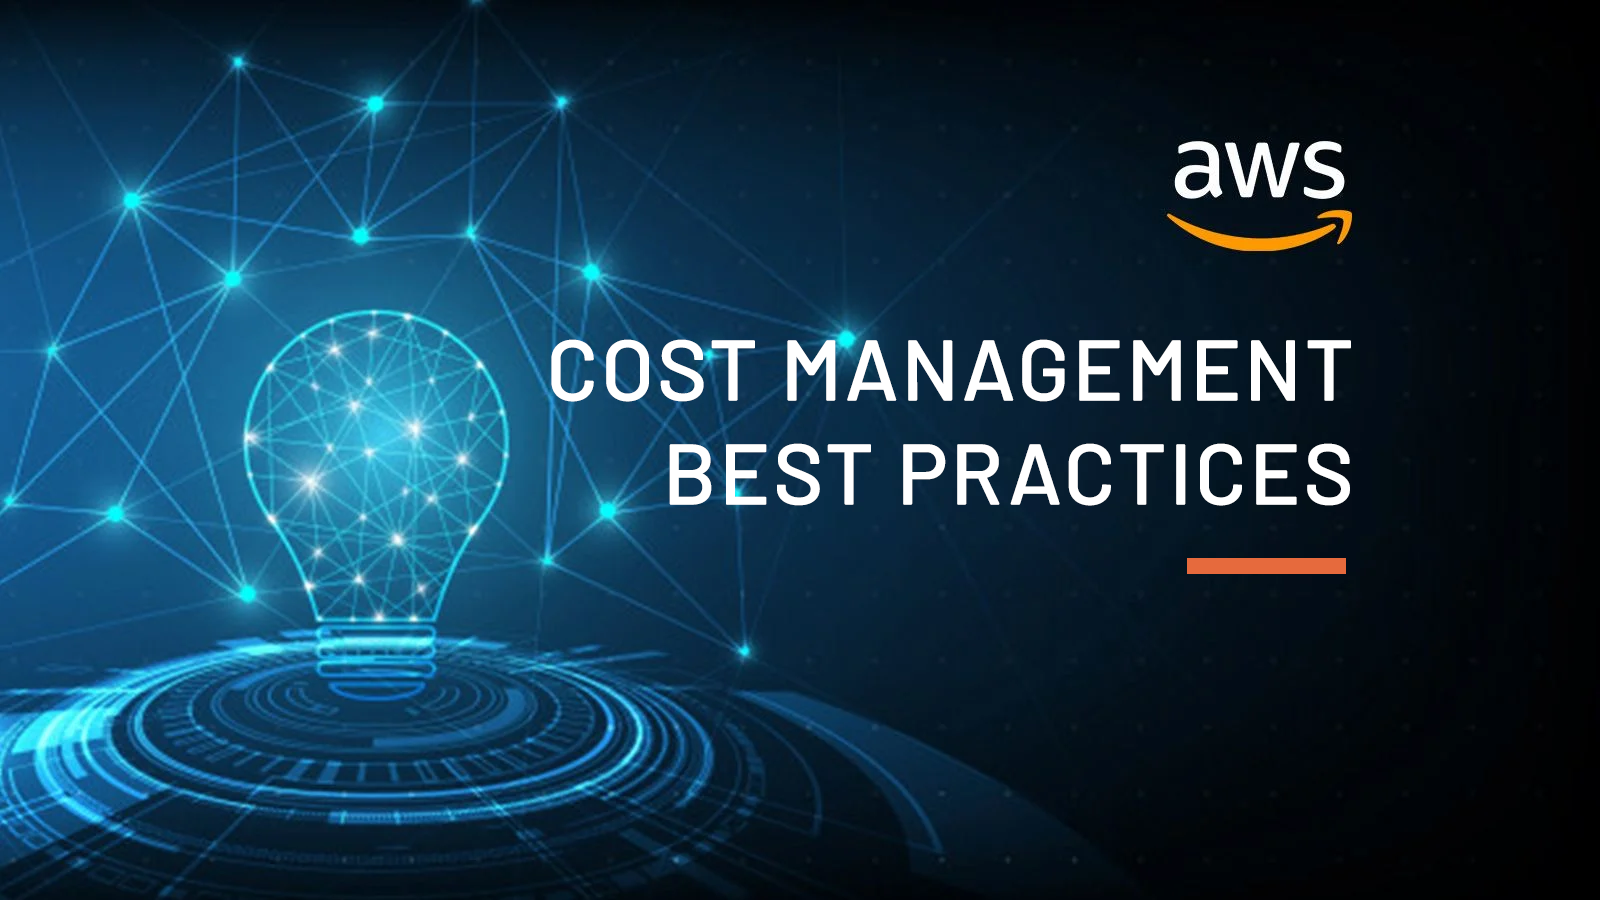 AWS Cost Management Best Practices